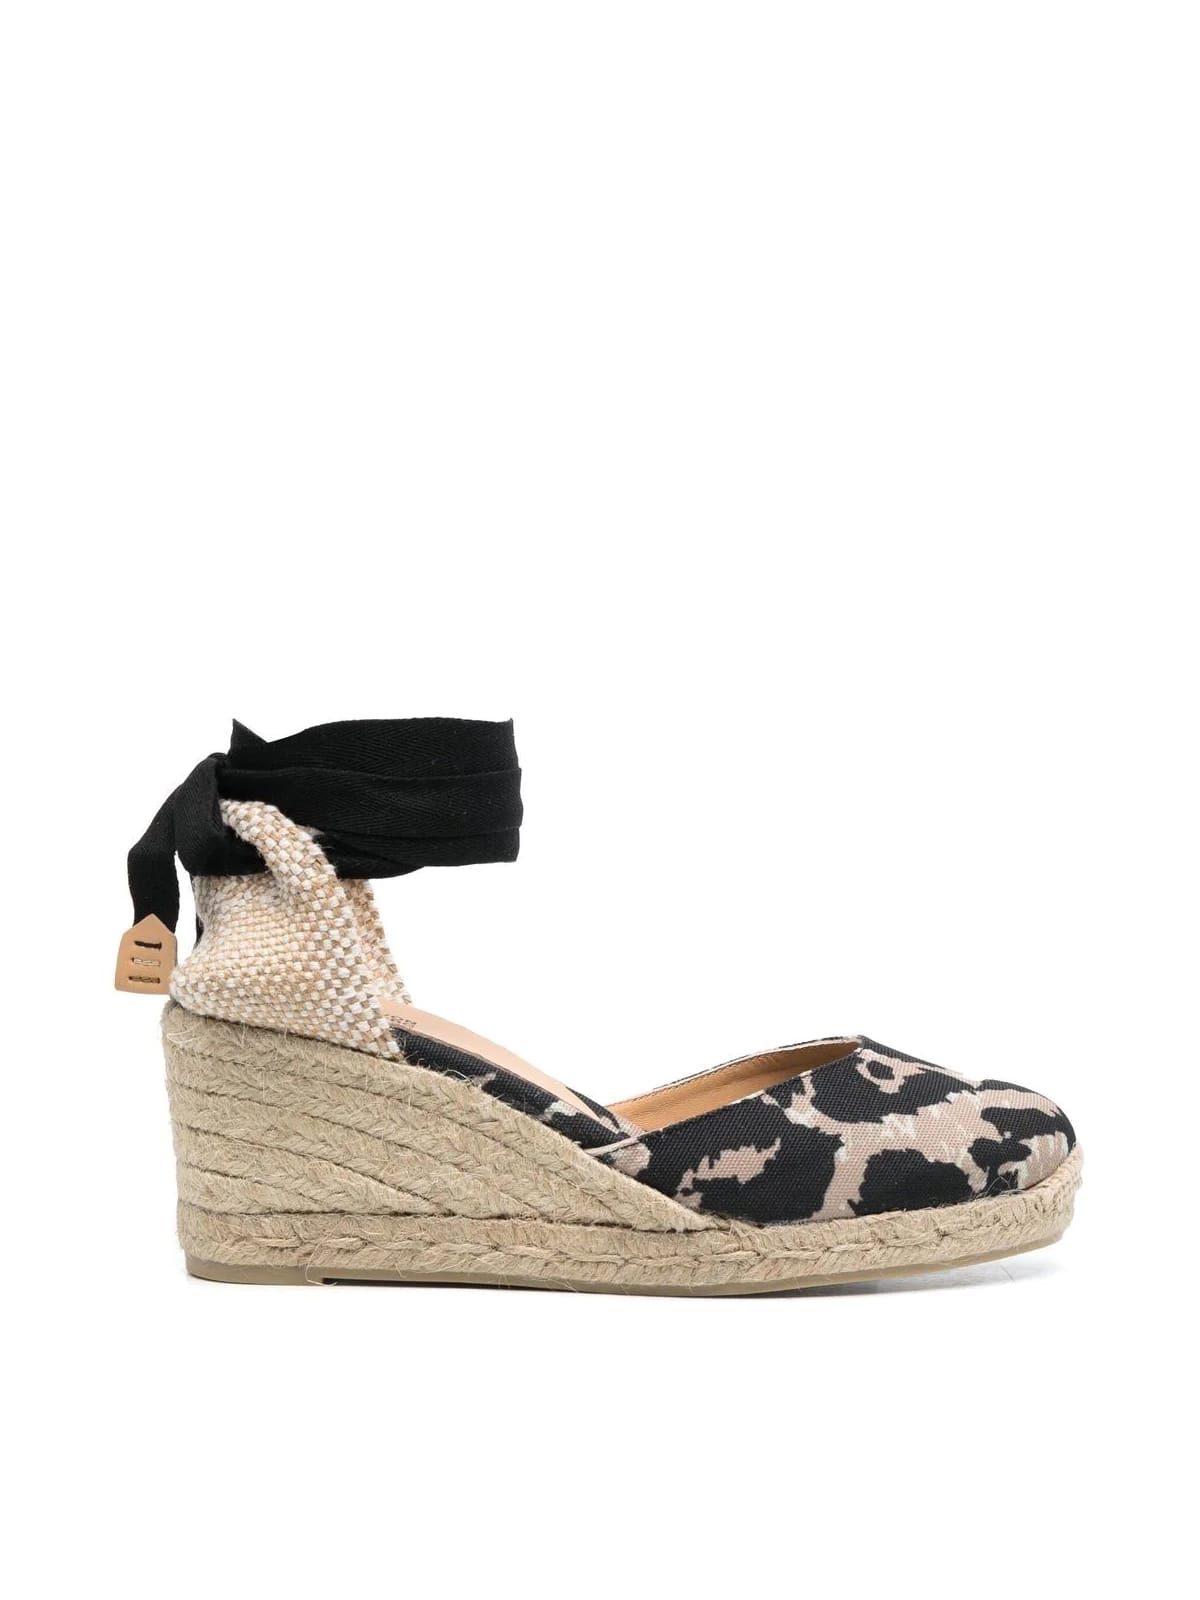 Castañer Carina Espadrilles With Laces On Ankles